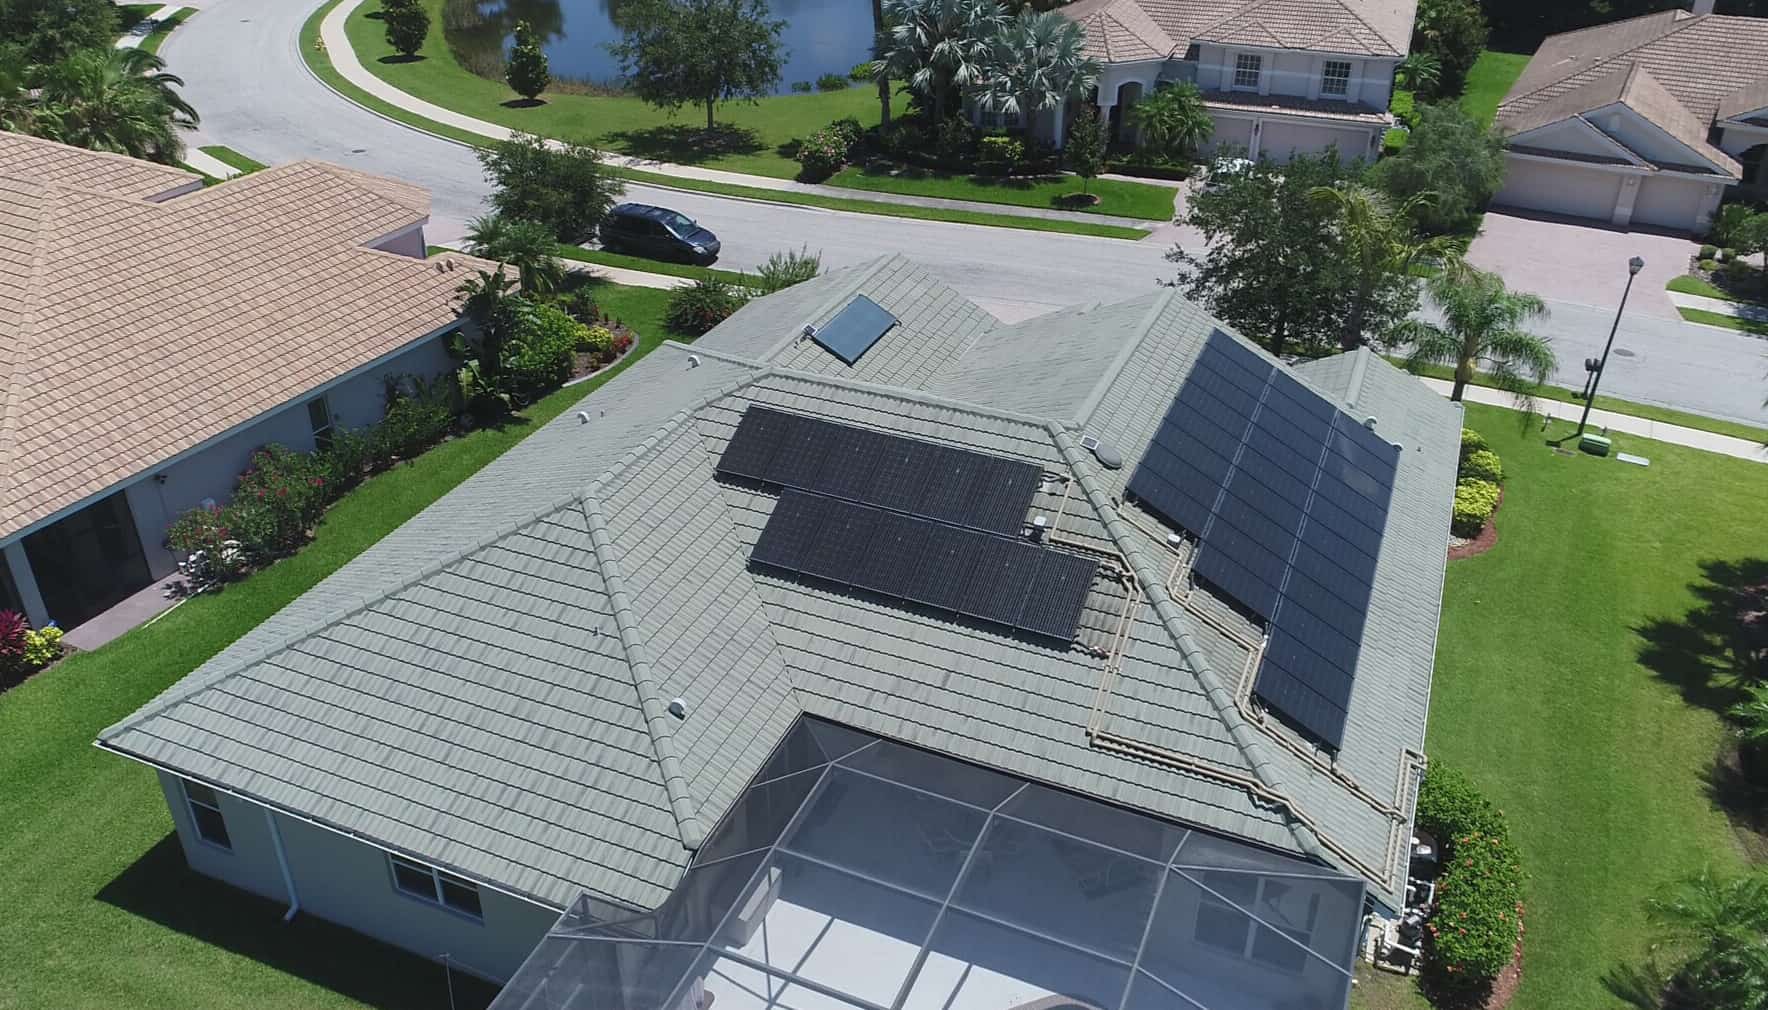 Using solar panels to heat your pool helps you get the most use out of it, heated to your desired temperature.